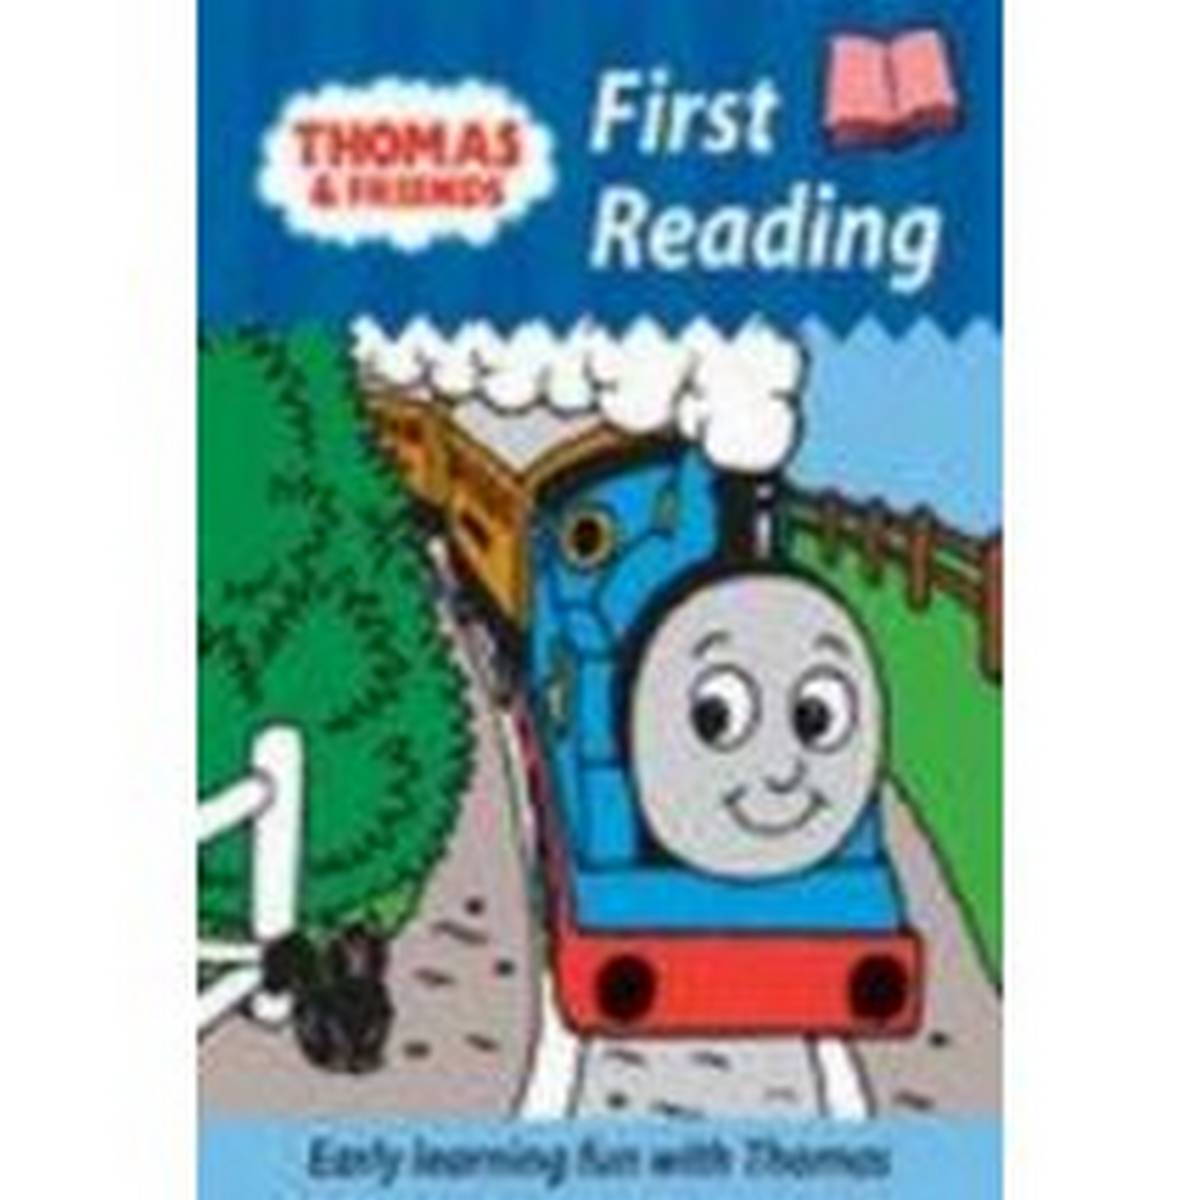 Thomas and Friends: First Reading